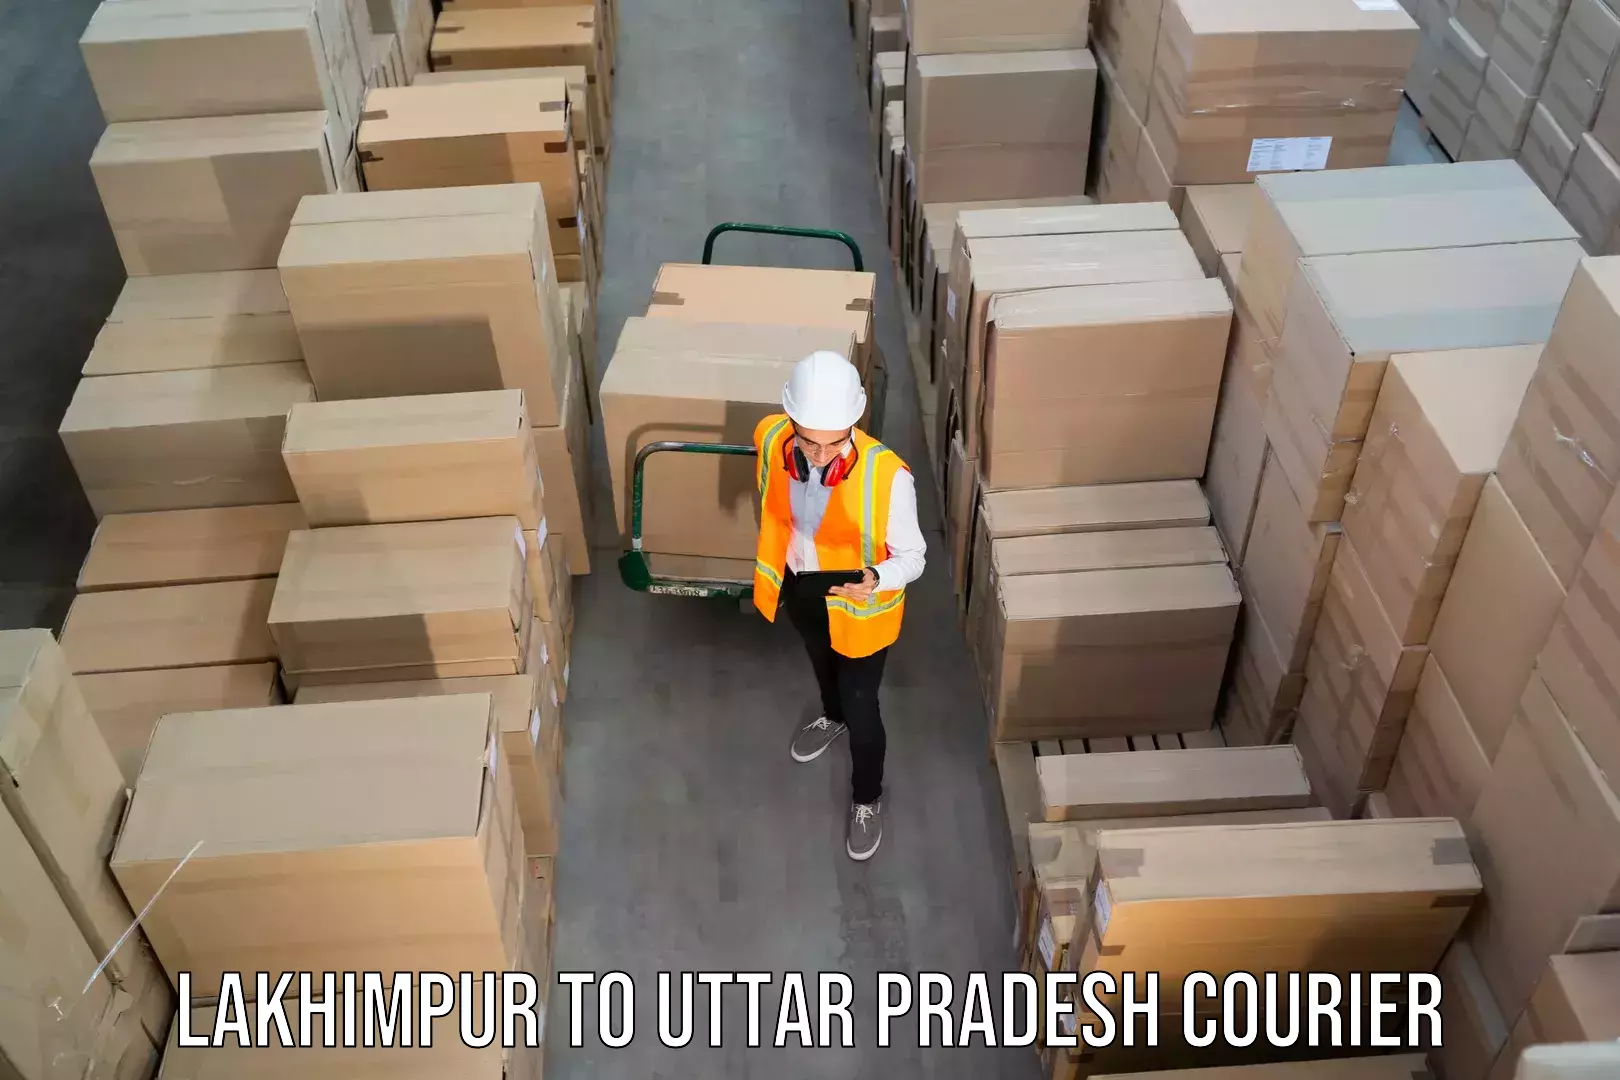 Professional courier services Lakhimpur to Meerut